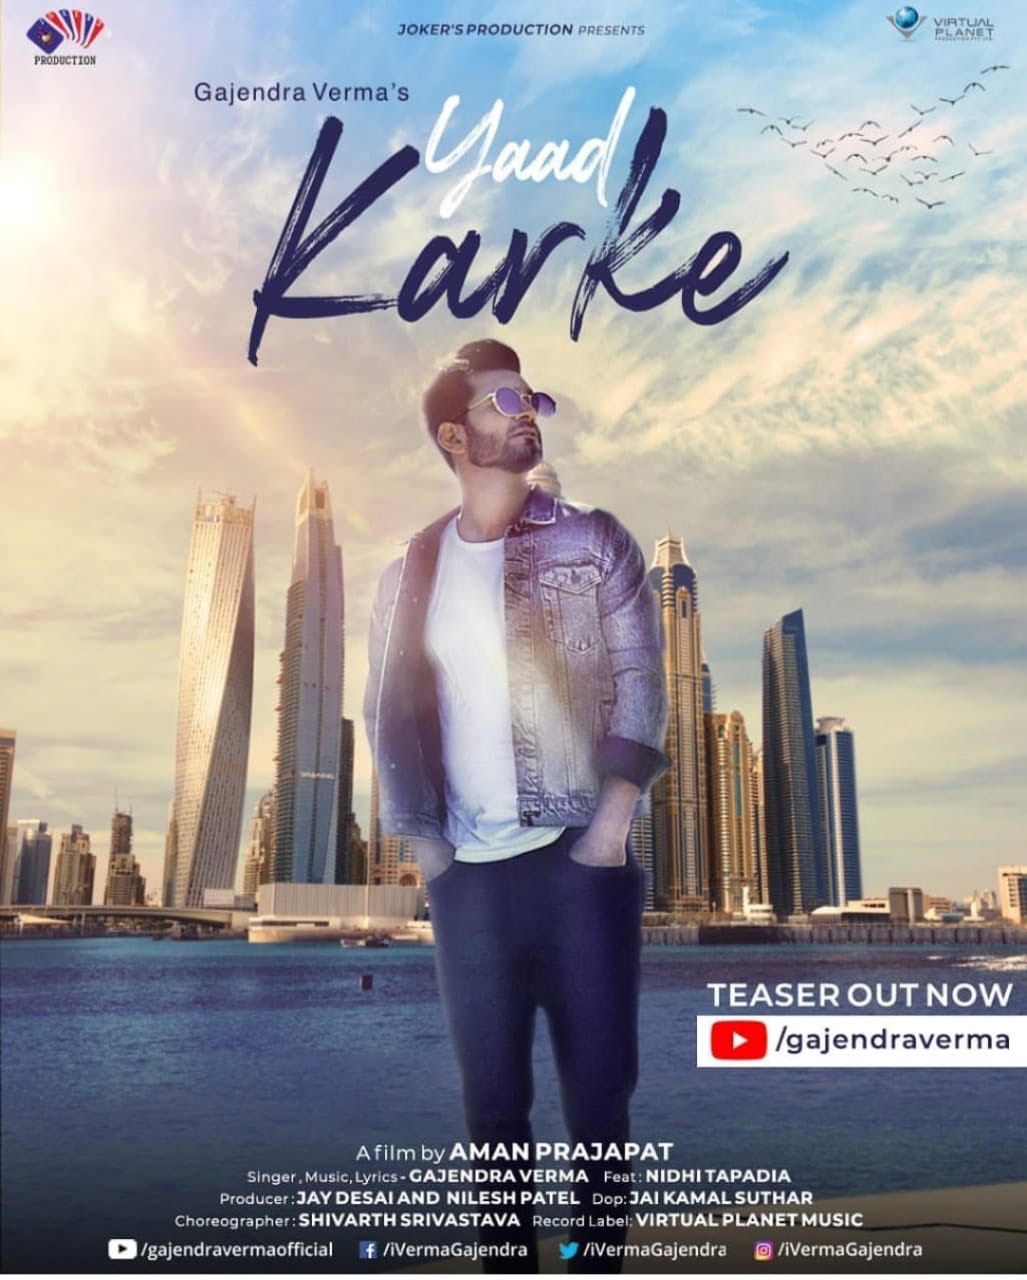 Gajendra Verma Is Back with His New Song, Yaad Karke by Sonia Malhotra Soi  and other Articles Contributed by Indians Community in Seattle Area